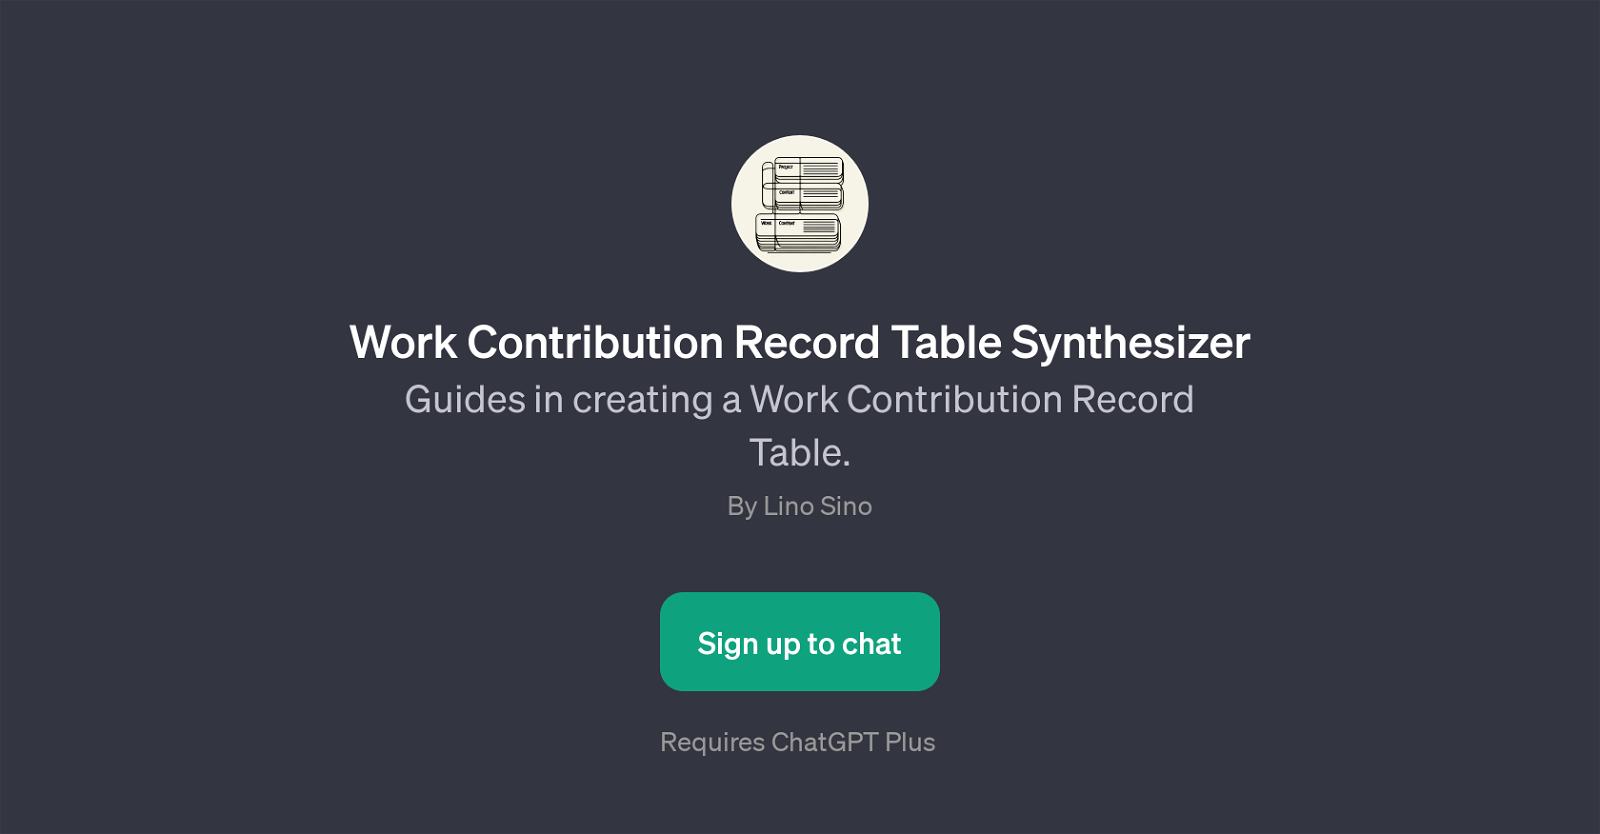 Work Contribution Record Table Synthesizer website